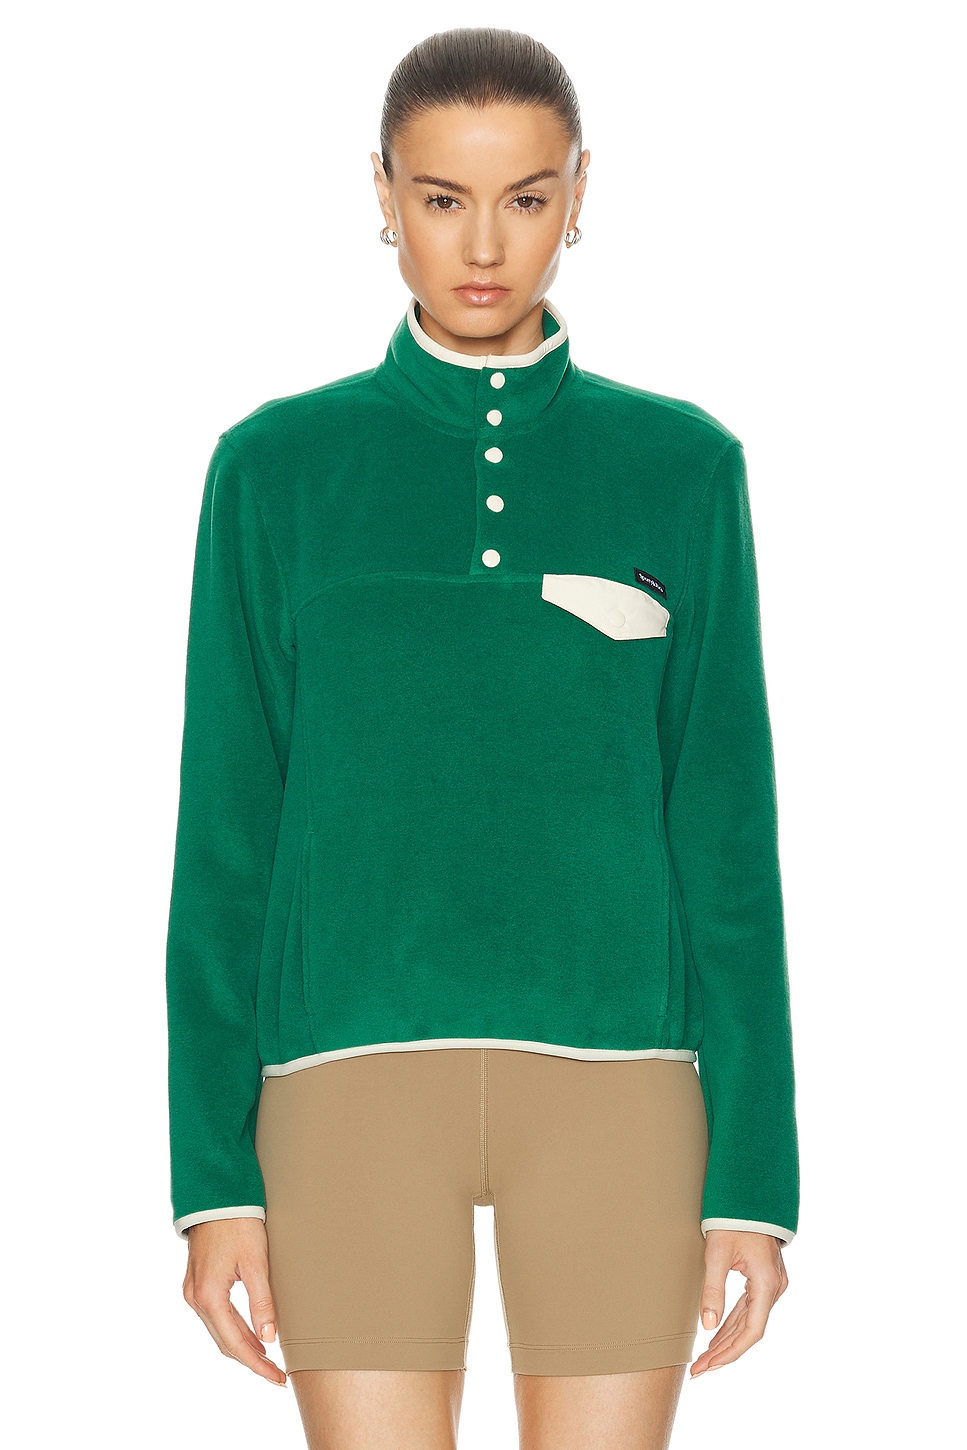 Image 1 of Sporty & Rich Buttoned Polar Sweatshirt in Green & Cream